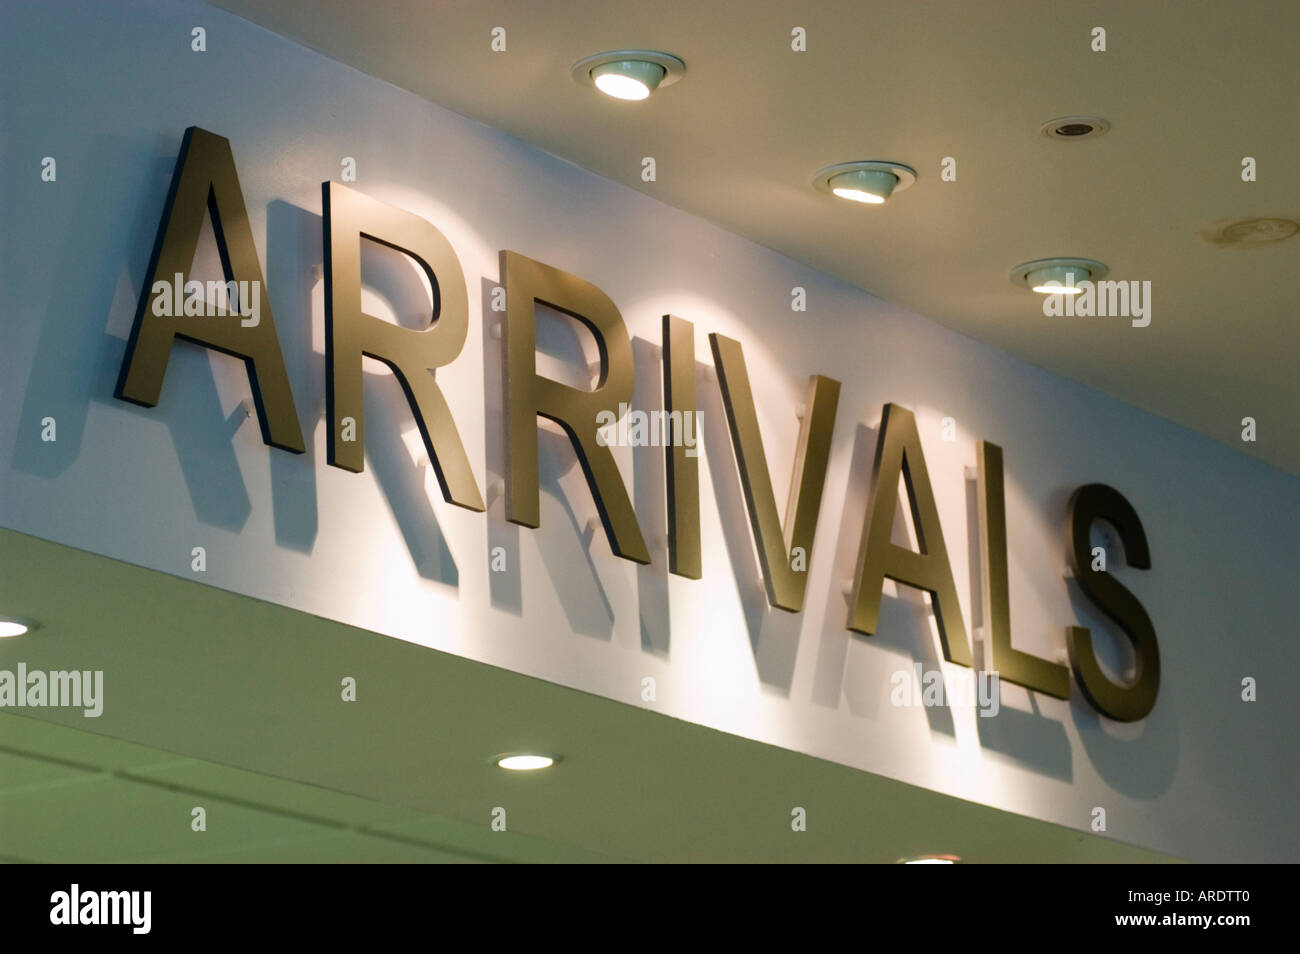 Arrivals Sign at Airport Stock Photo